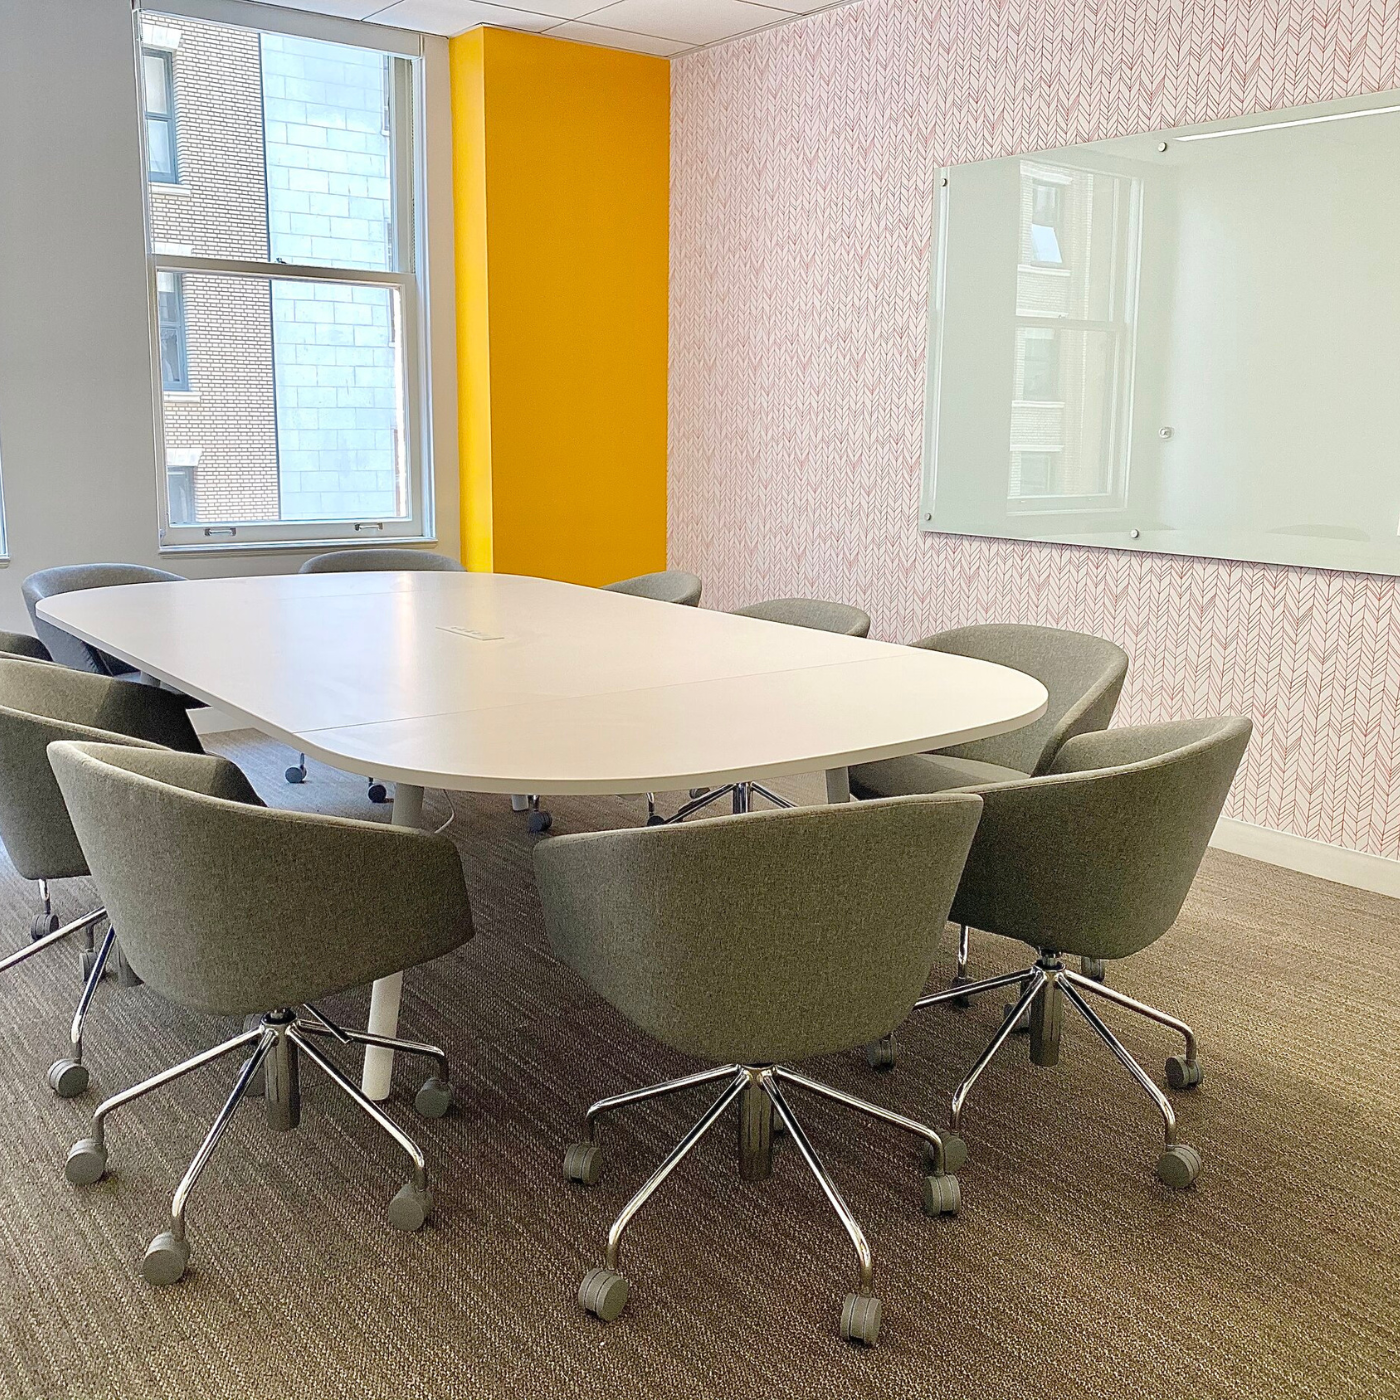 A white oval conference table with 10 gray rolling chairs around it sits in the middle of a room in front of two windows with a brick office building outside. The wall to the right of the windows has been painted dark yellow. On the wall to the right of the table and chairs is a whiteboard on a wall with wallpaper featuring rows of light pink and white herringbone.